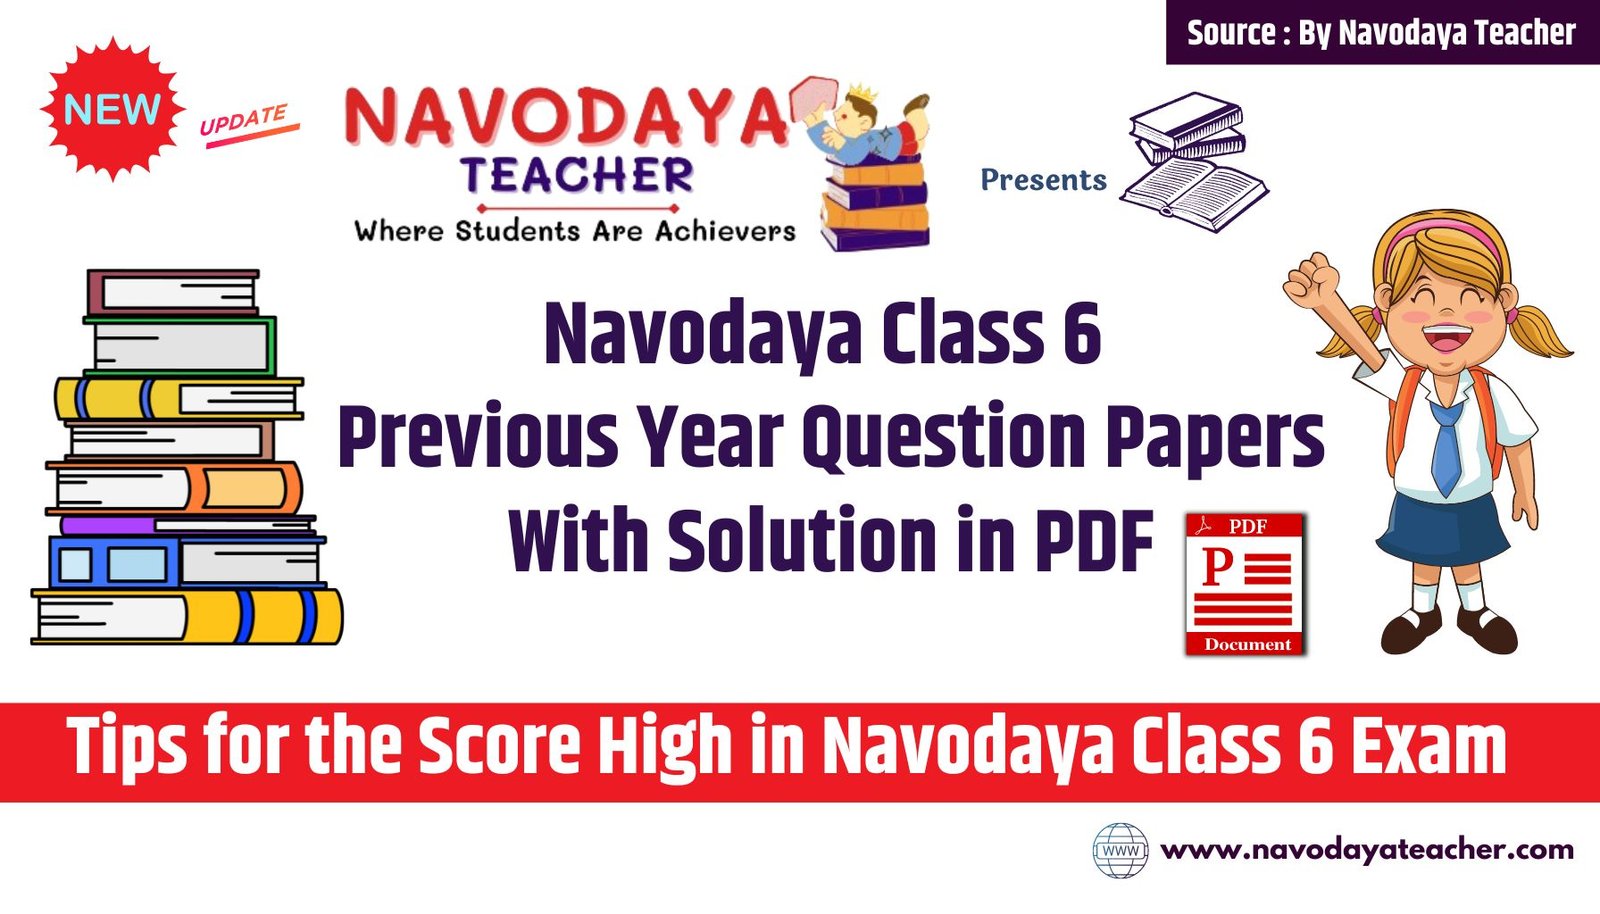 Navodaya Vidyalaya Class 6 Old Papers with Solution in PDF